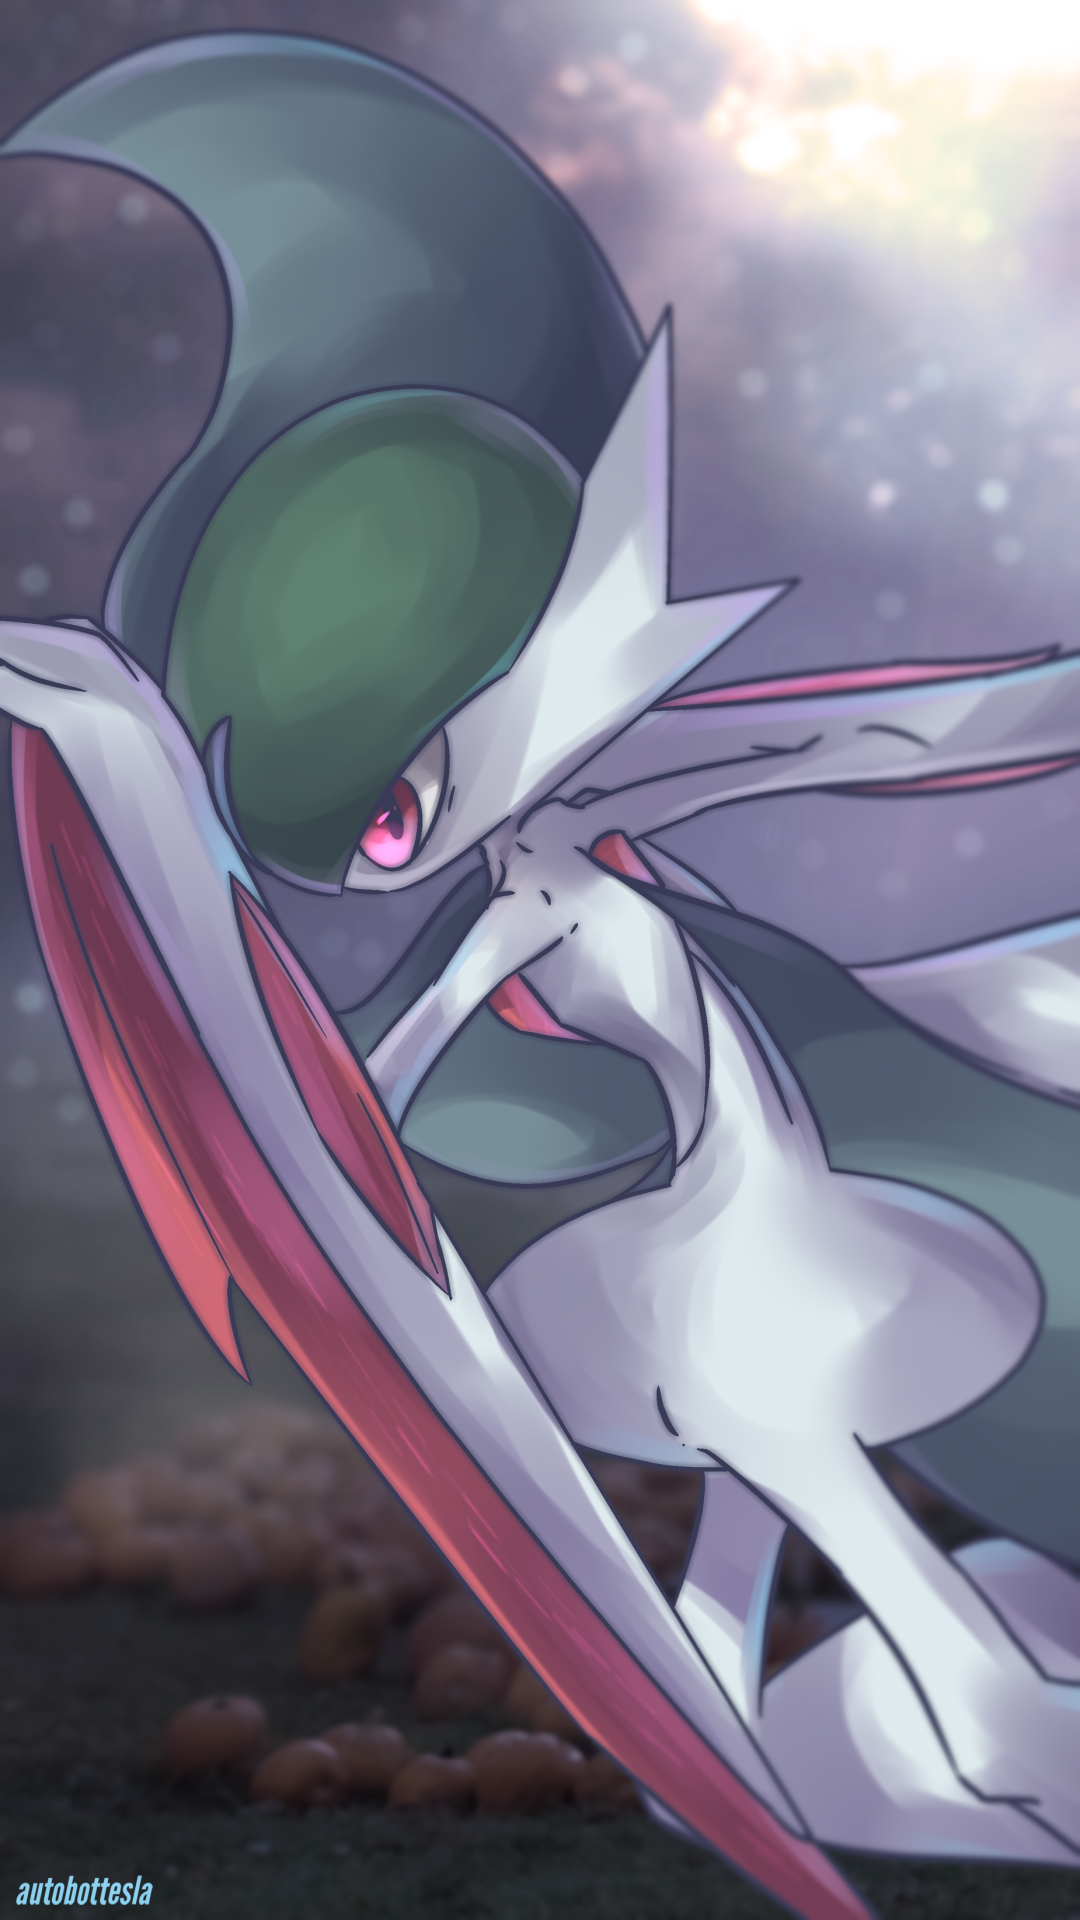 Anne, When You Piss Her Off - Pokemon Gallade Wallpaper Iphone , HD Wallpaper & Backgrounds